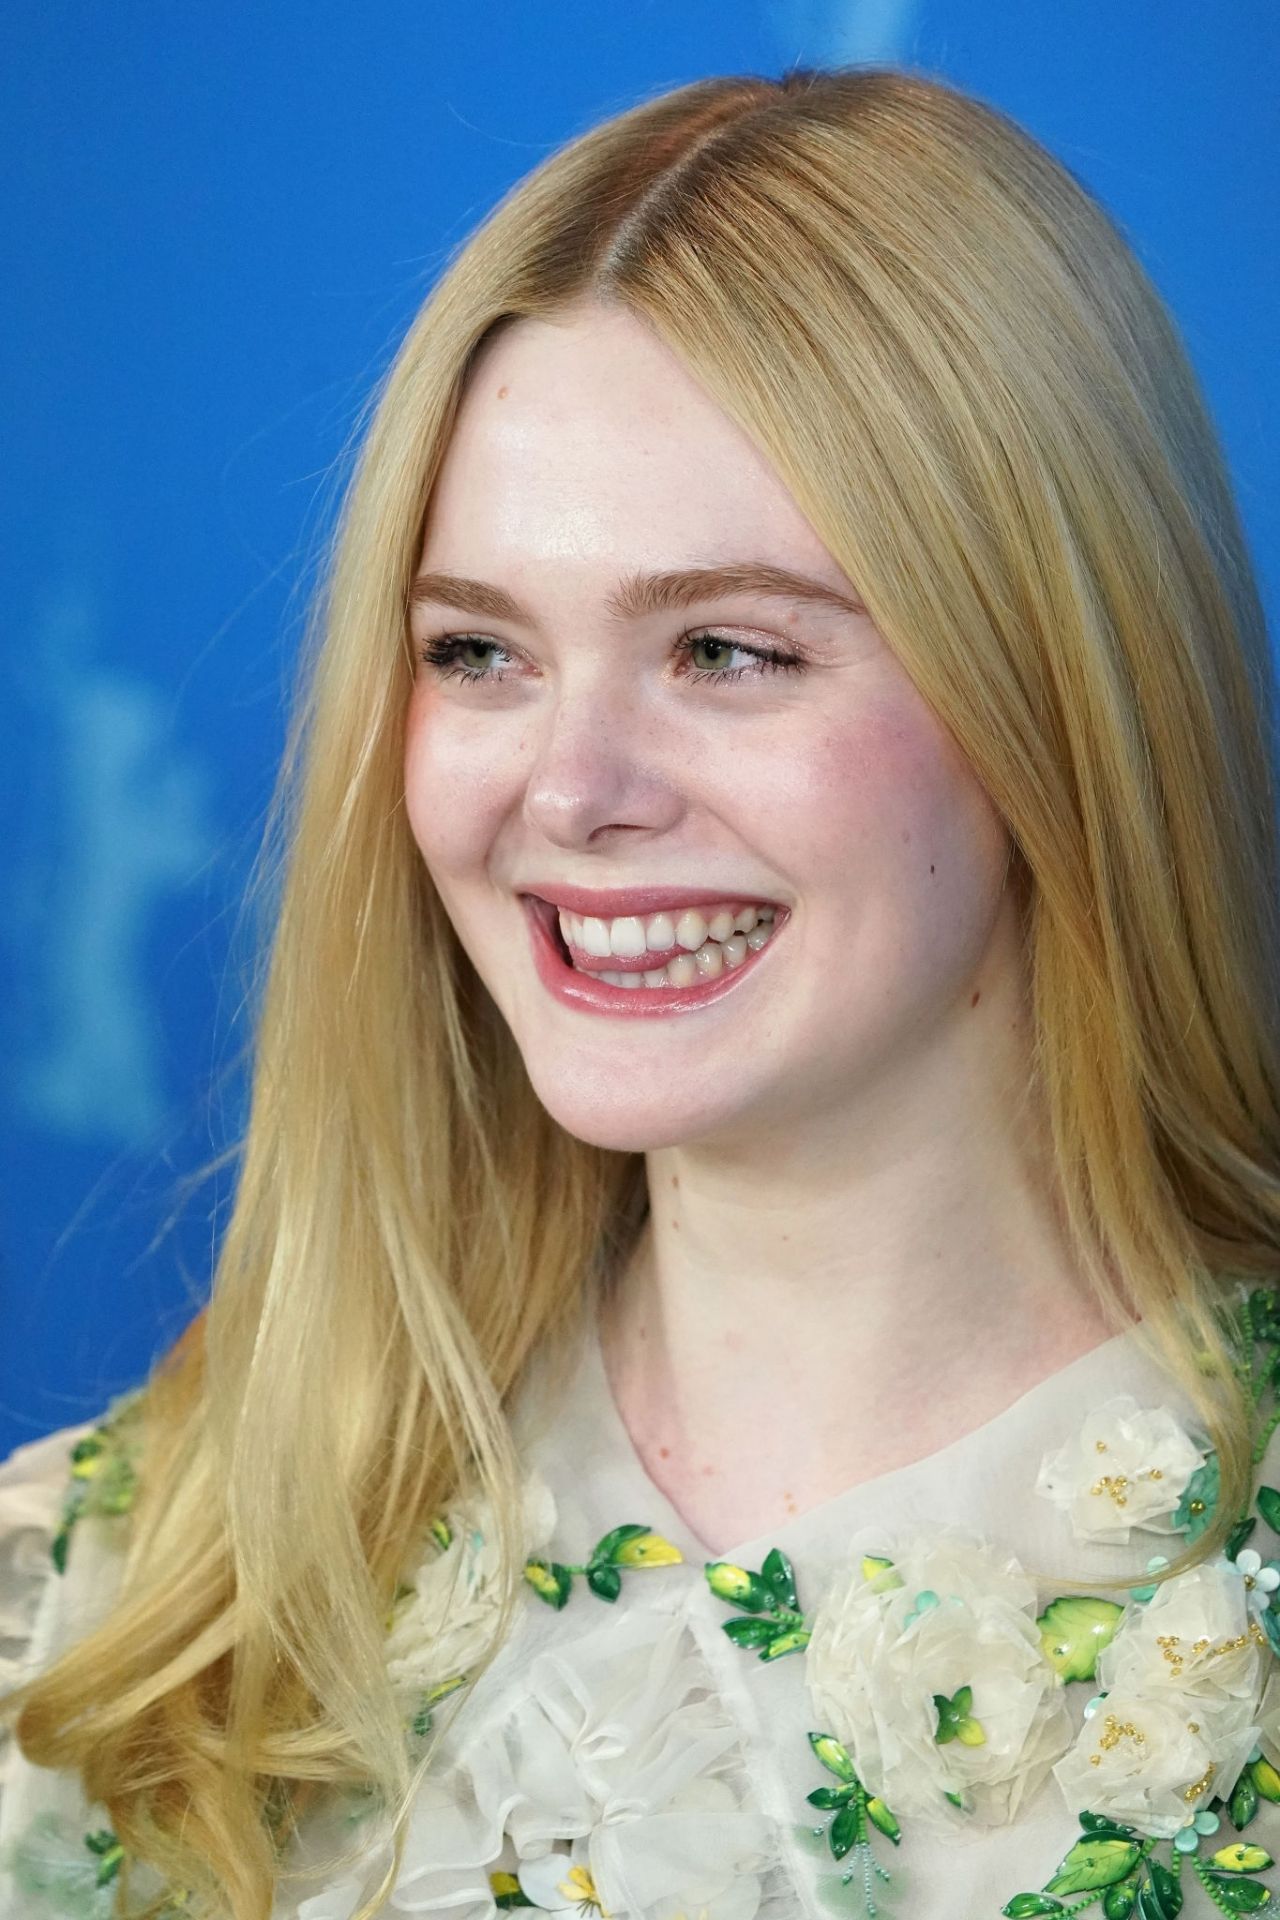 Elle Fanning - "The Roads Not Taken" Photo Call at Berlinale 2020...